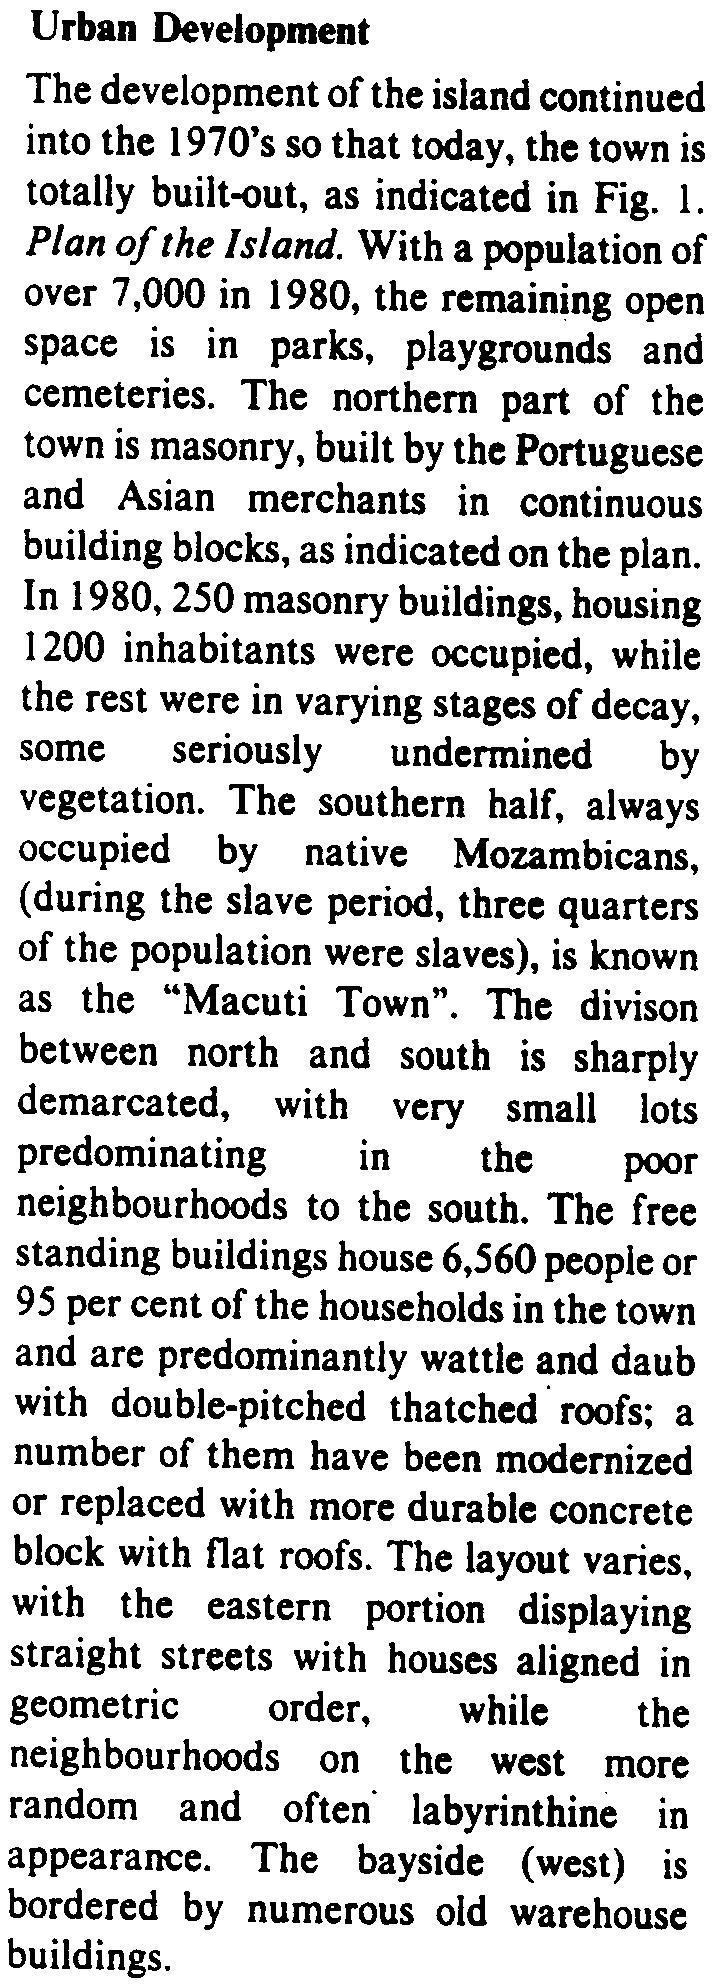 By mid-century, the population was about 4,500 of which three quarters were slaves.